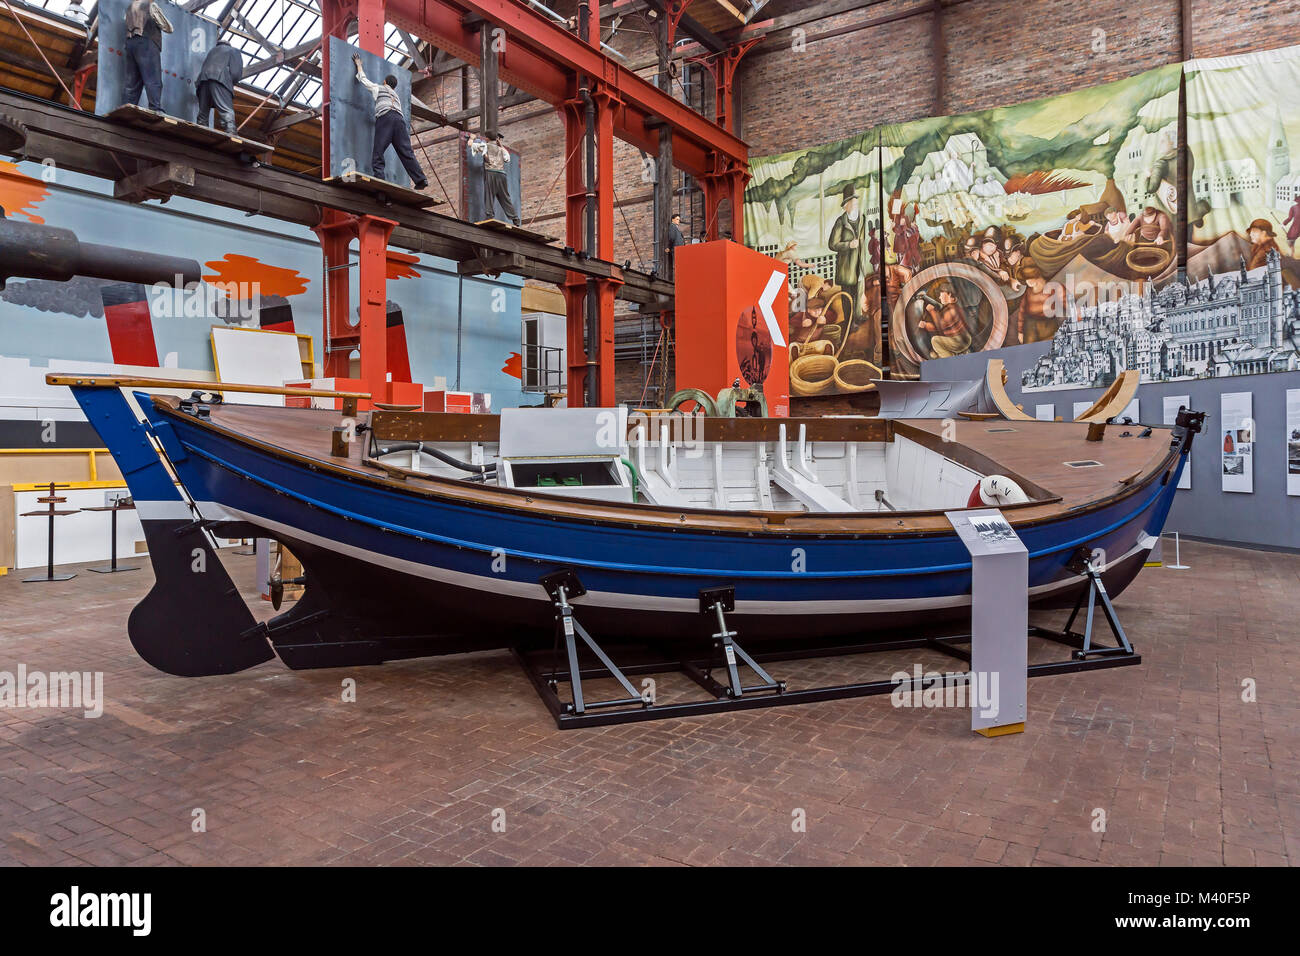 Interior of the Linthouse museum building at Scottish Maritime Museum in Irvine North Ayrshire Scotland UK with Zulu skiff fishing boat Katie Stock Photo